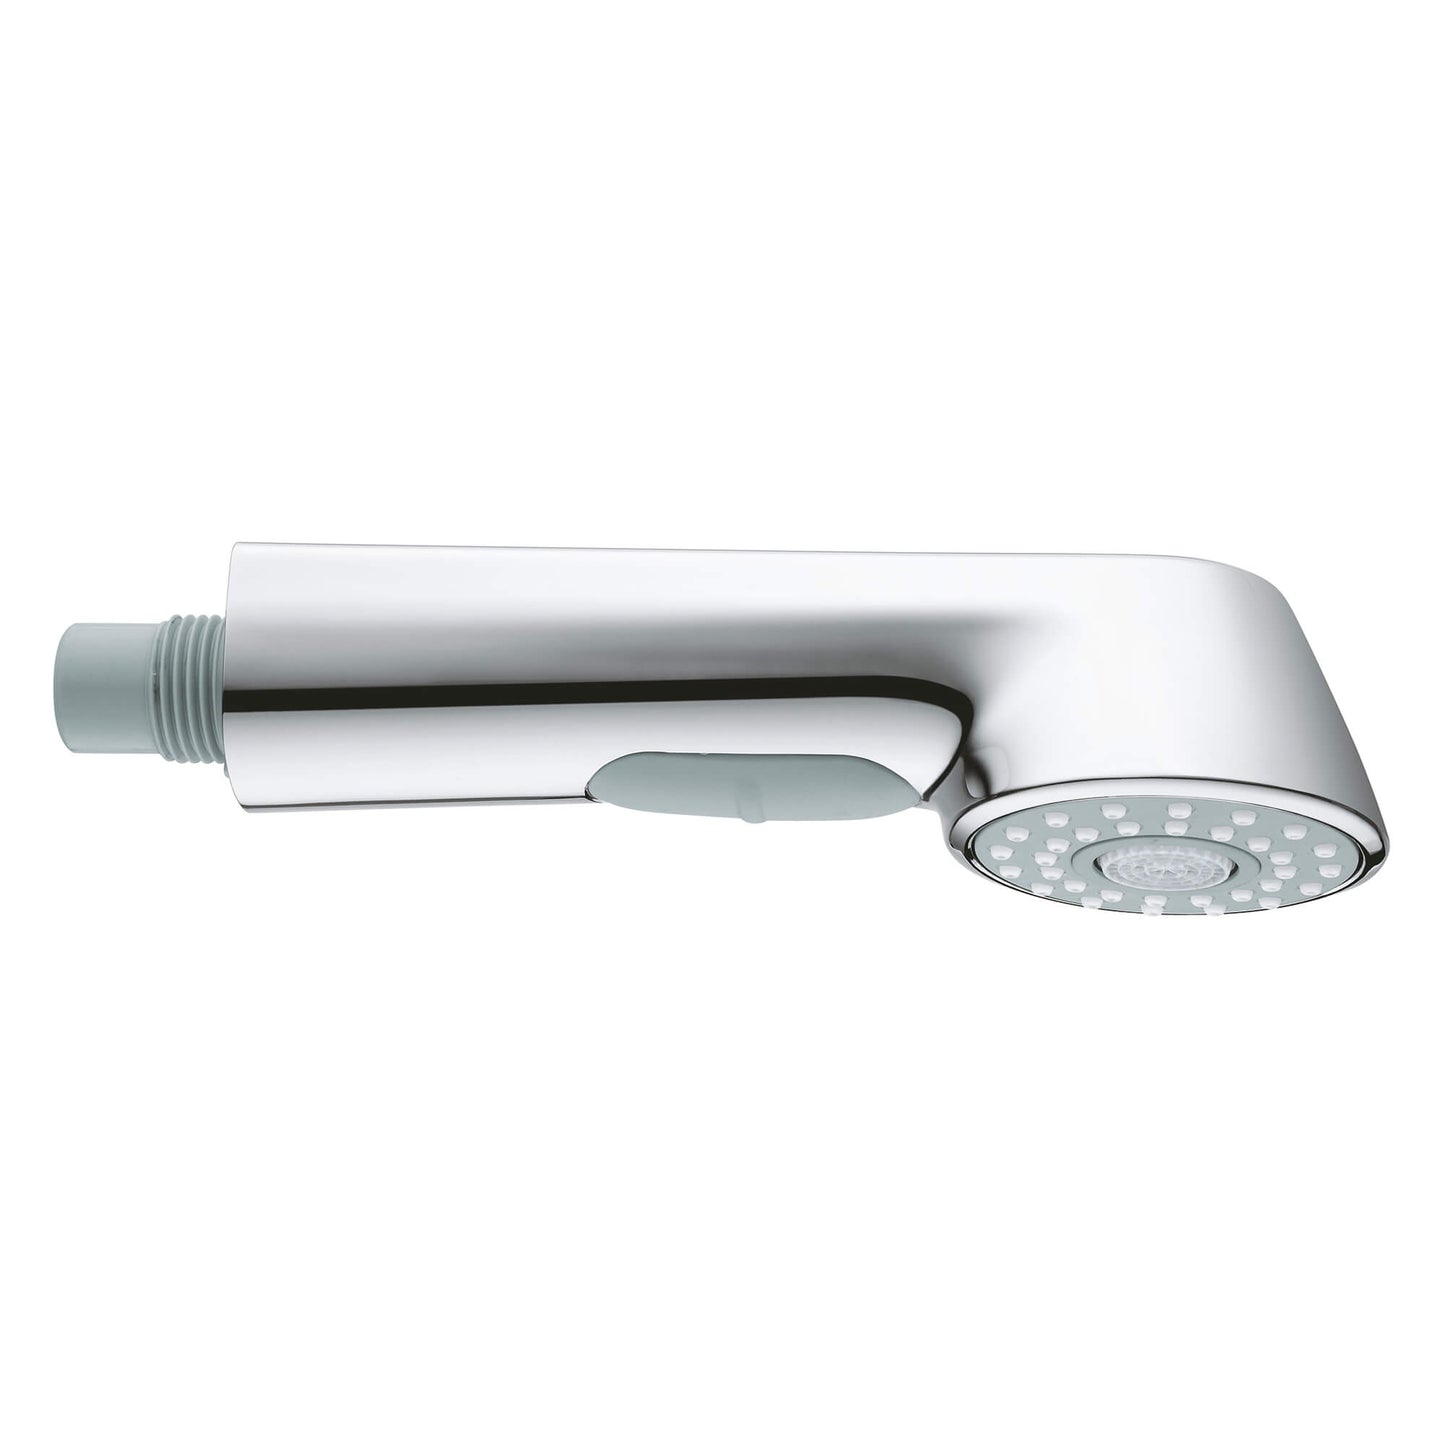 GROHE 46710000 Universal Chrome Pull-Out Spray